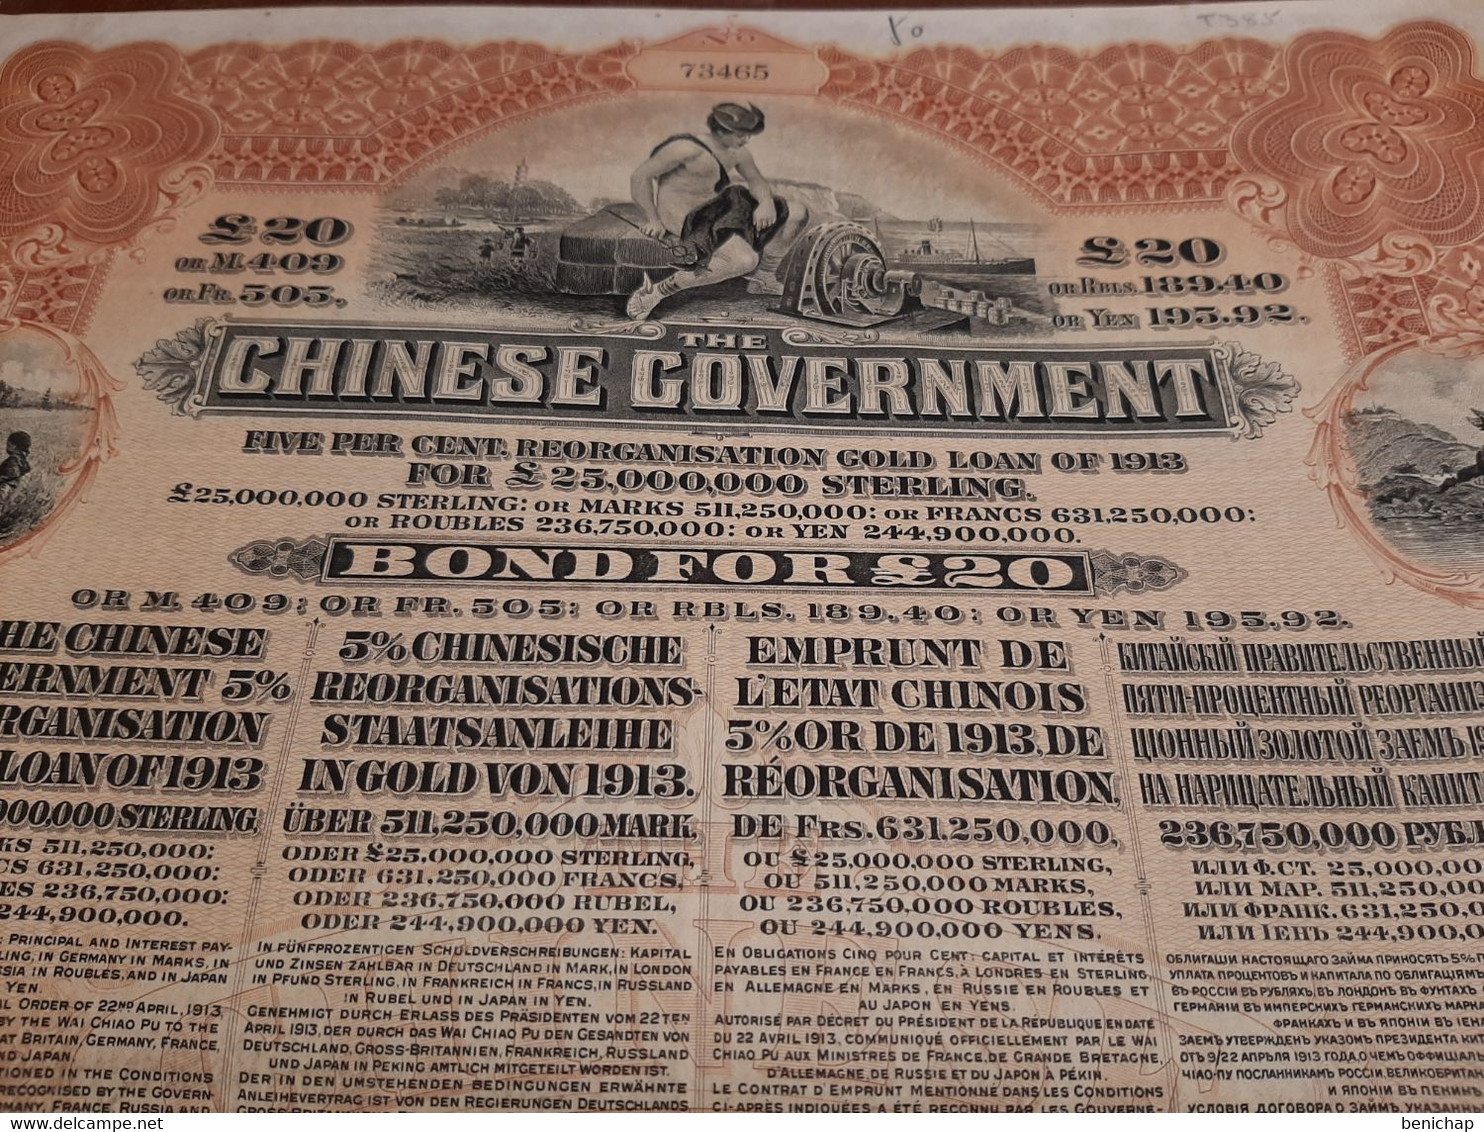 1913 - Chine - China - Chinese-Chinese Government Emprunt De L'Etat Chinois 5% - Hong Kong & Shanghai Banking In London. - Asien